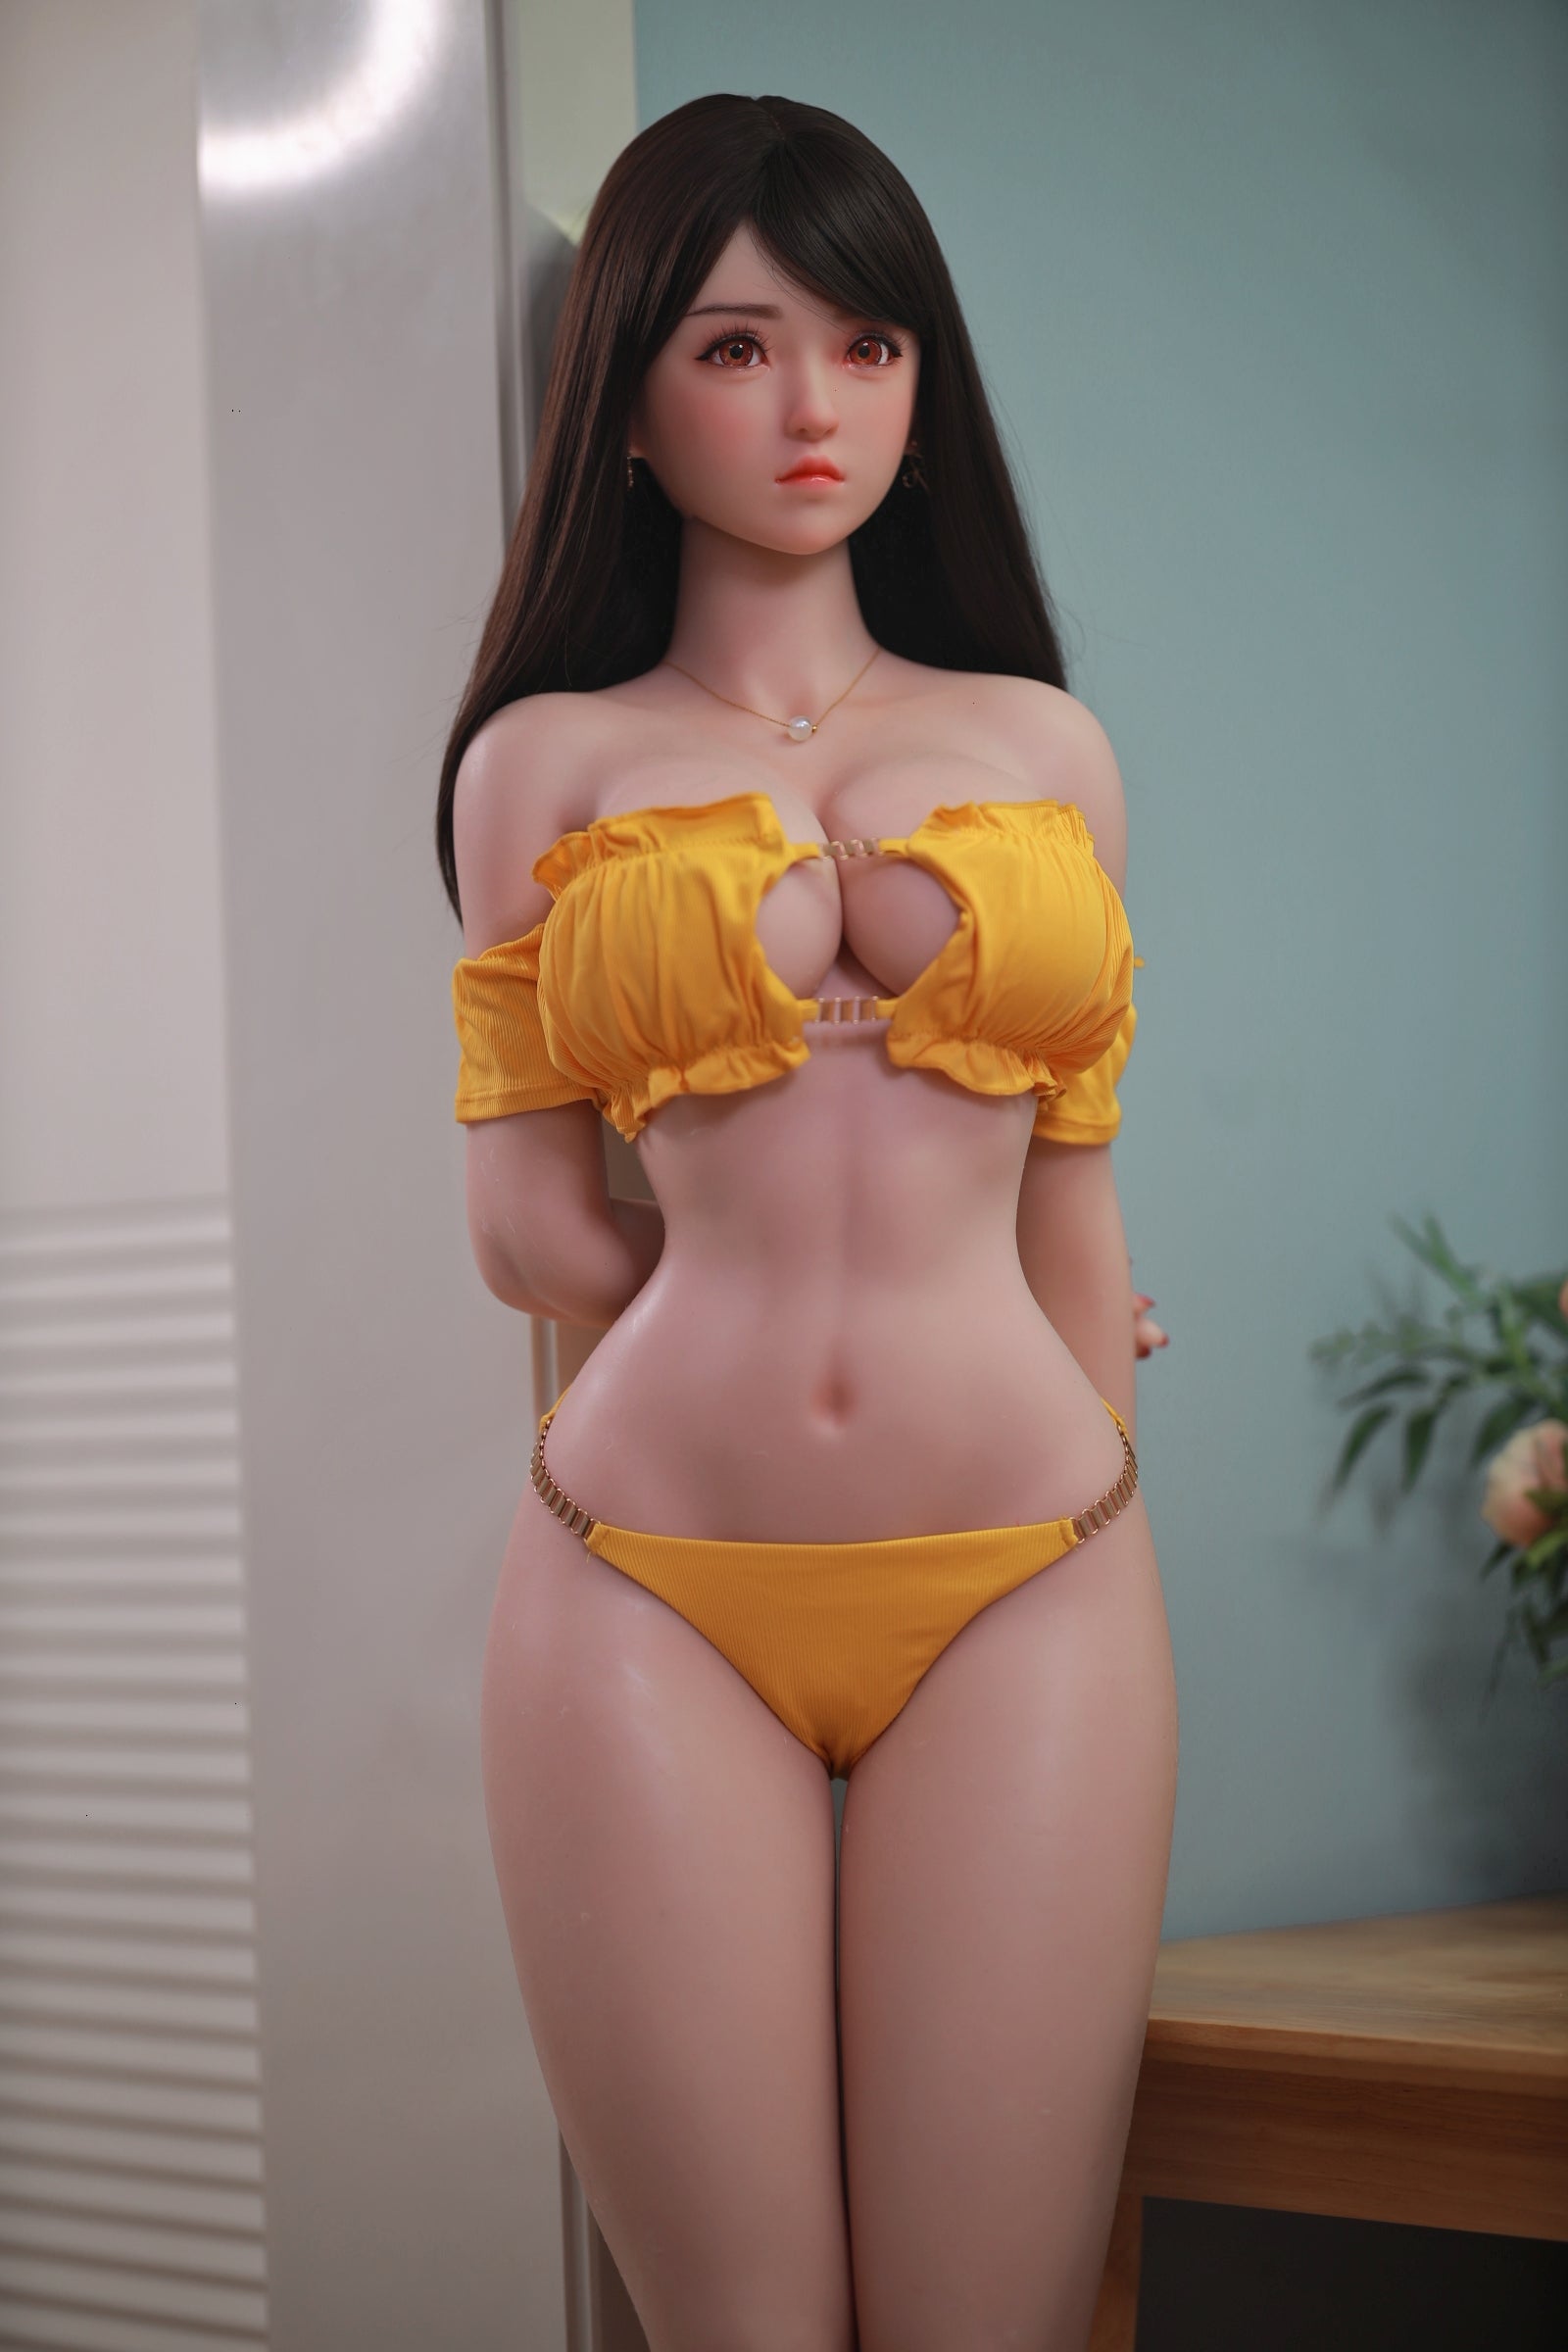 JY Doll 161 cm Silicone - Lian meng | Buy Sex Dolls at DOLLS ACTUALLY